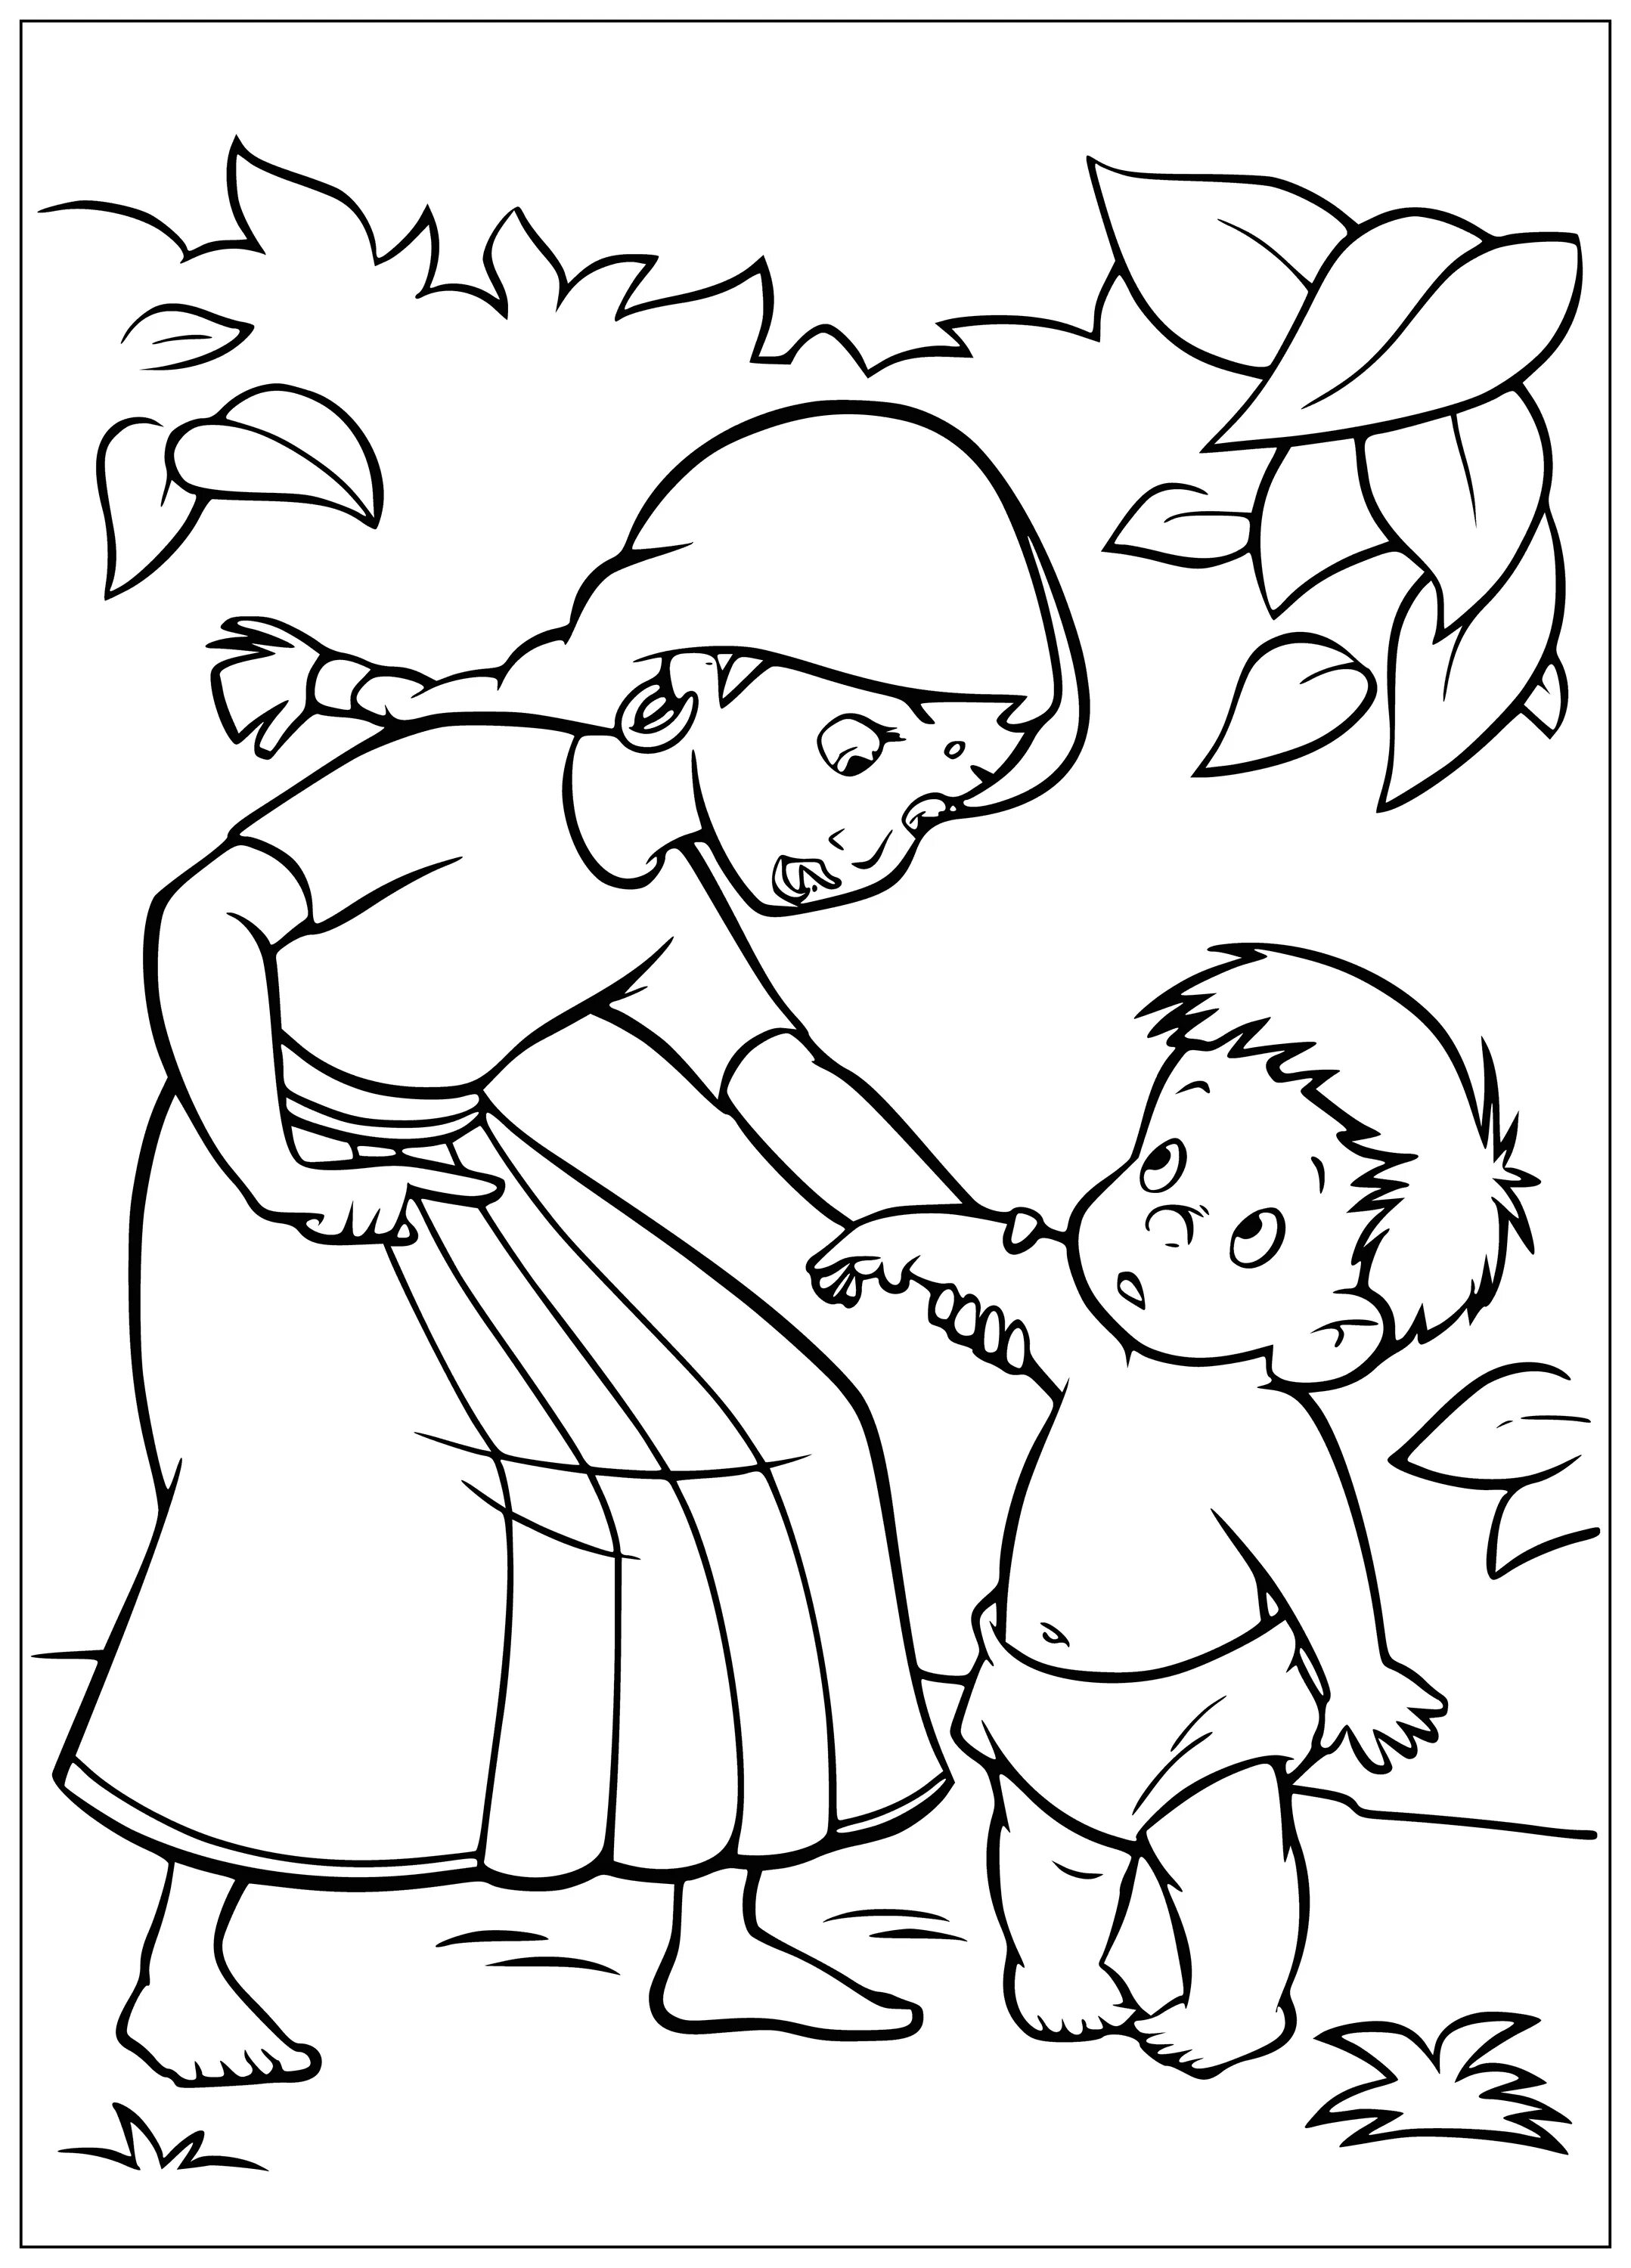 Nice brother and sister coloring pages